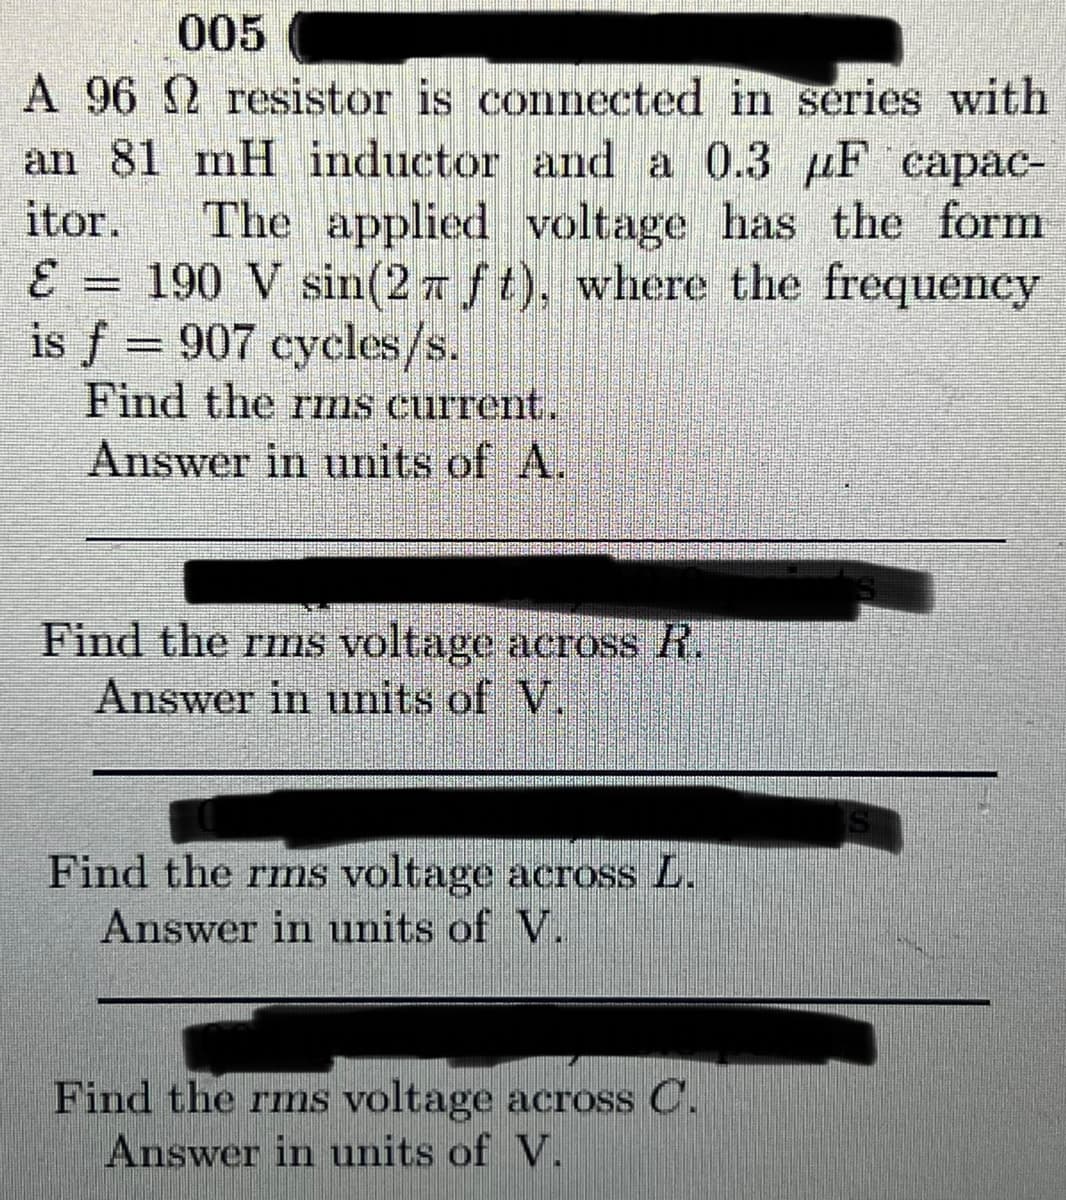 005
A 96 2 resistor is
esistor is
connected in series with
an 81 mH inductor and a 0.3 μF capac-
itor.
The applied voltage has the form
190 V sin(2 ft), where the frequency
is f = 907 cycles/s.
E
Find the rms current.
Answer in units of A.
Find the rms voltage across R.
Answer in units of V.
Find the rms voltage across L.
Answer in units of V.
Find the rms voltage across C.
Answer in units of V.